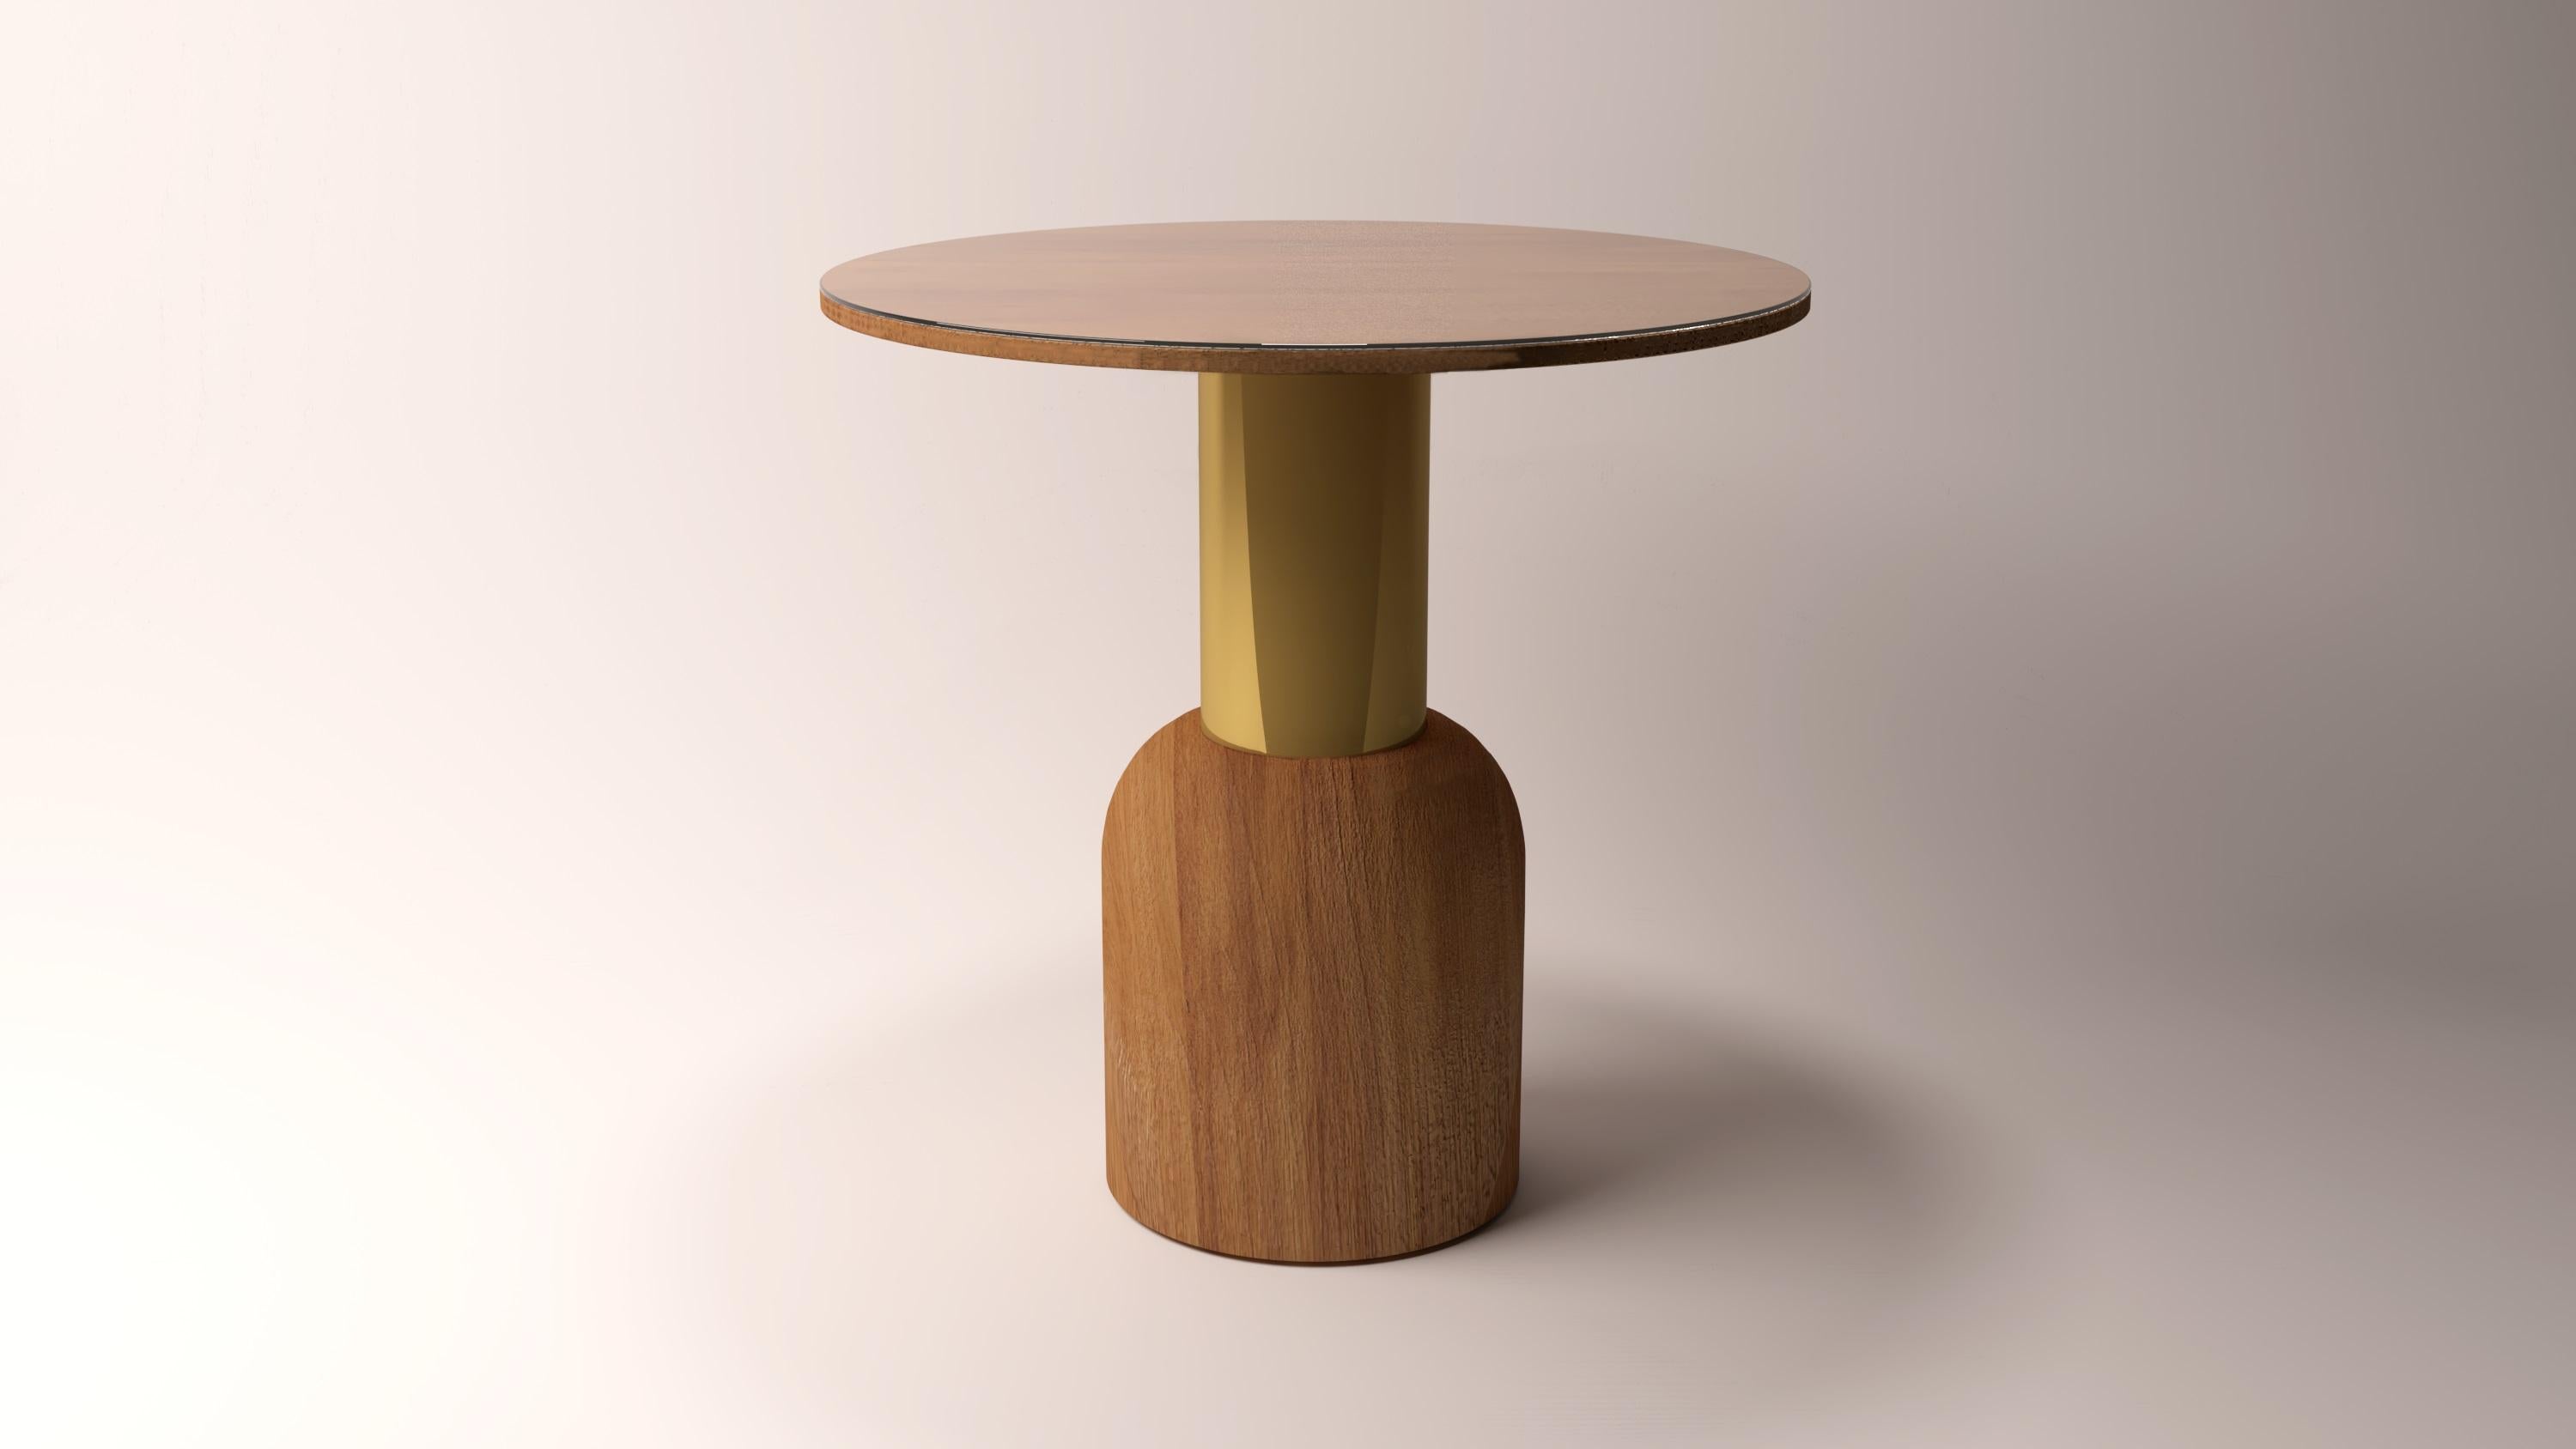 Serenity Fusion 50 Iroko Wood Table by Alabastro Italiano
Dimensions: D 50 x H 50 cm.
Materials: Iroko wood, metal.
12.5 kg.

Available in another size: H 40 cm.
Available in other metal finishes.
Available in different combinations of Iroko wood